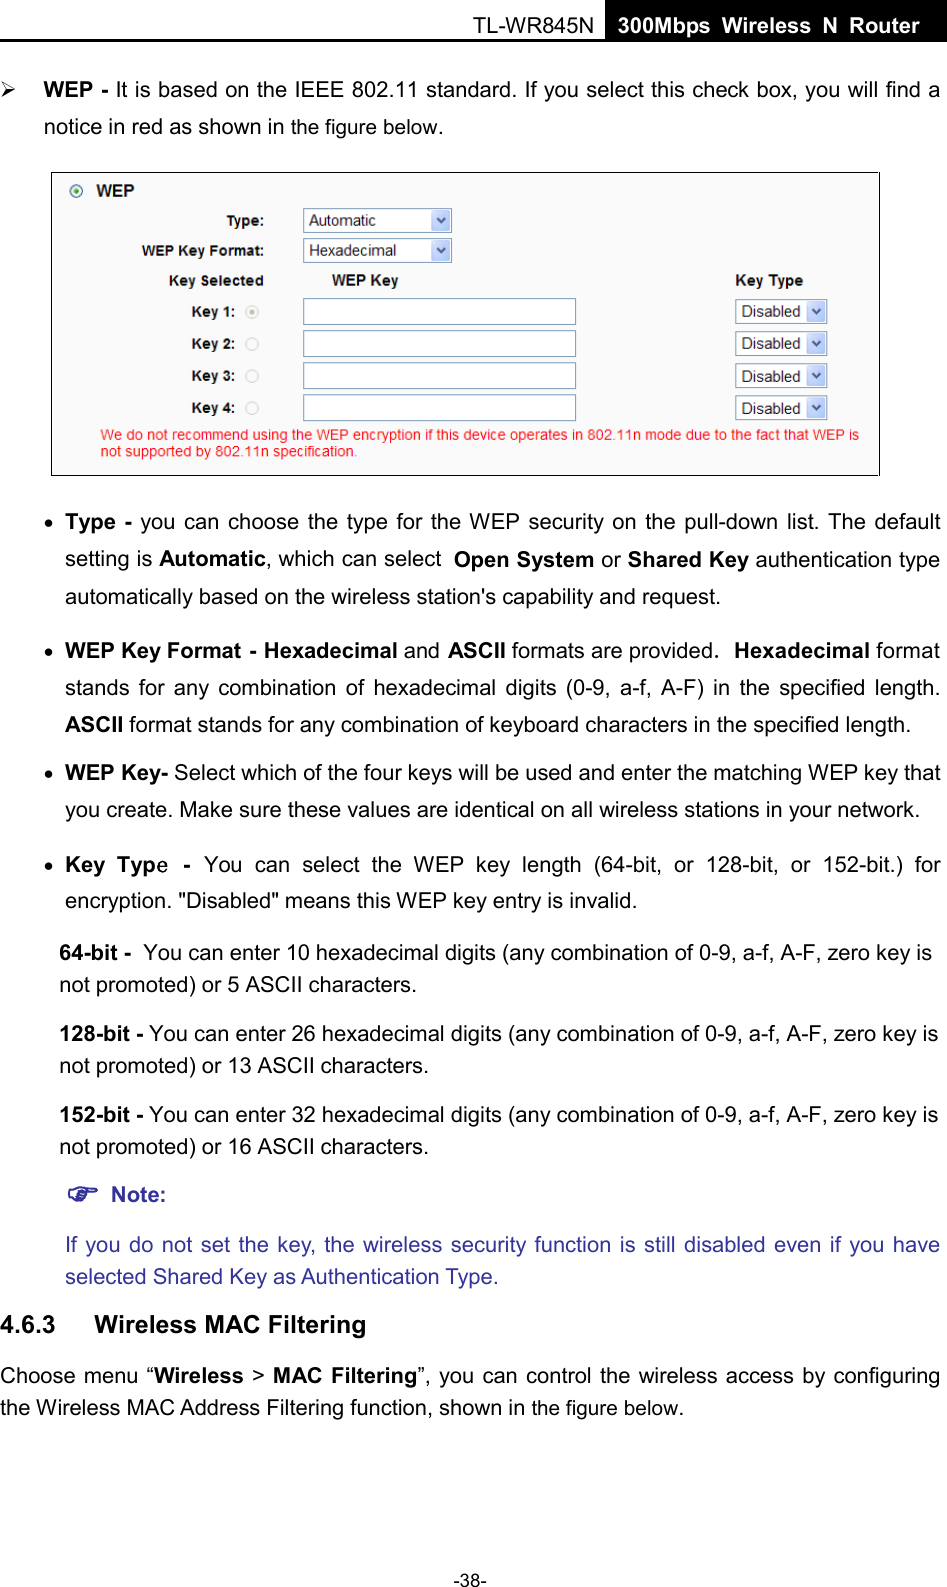  TL-WR845N  300Mbps Wireless N Router     WEP - It is based on the IEEE 802.11 standard. If you select this check box, you will find a notice in red as shown in the figure below.  • Type - you can choose the type for the WEP security on the pull-down list. The default setting is Automatic, which can select Open System or Shared Key authentication type automatically based on the wireless station&apos;s capability and request. • WEP Key Format - Hexadecimal and ASCII formats are provided. Hexadecimal format stands for any combination of hexadecimal digits (0-9, a-f, A-F) in the specified length. ASCII format stands for any combination of keyboard characters in the specified length.   • WEP Key- Select which of the four keys will be used and enter the matching WEP key that you create. Make sure these values are identical on all wireless stations in your network.   • Key Type - You can select the WEP key length (64-bit, or 128-bit, or 152-bit.) for encryption. &quot;Disabled&quot; means this WEP key entry is invalid. 64-bit - You can enter 10 hexadecimal digits (any combination of 0-9, a-f, A-F, zero key is not promoted) or 5 ASCII characters.   128-bit - You can enter 26 hexadecimal digits (any combination of 0-9, a-f, A-F, zero key is not promoted) or 13 ASCII characters.   152-bit - You can enter 32 hexadecimal digits (any combination of 0-9, a-f, A-F, zero key is not promoted) or 16 ASCII characters.    Note:   If you do not set the key, the wireless security function is still disabled even if you have selected Shared Key as Authentication Type.   4.6.3 Wireless MAC Filtering   Choose menu “Wireless &gt; MAC Filtering”, you can control the wireless access by configuring the Wireless MAC Address Filtering function, shown in the figure below. -38- 